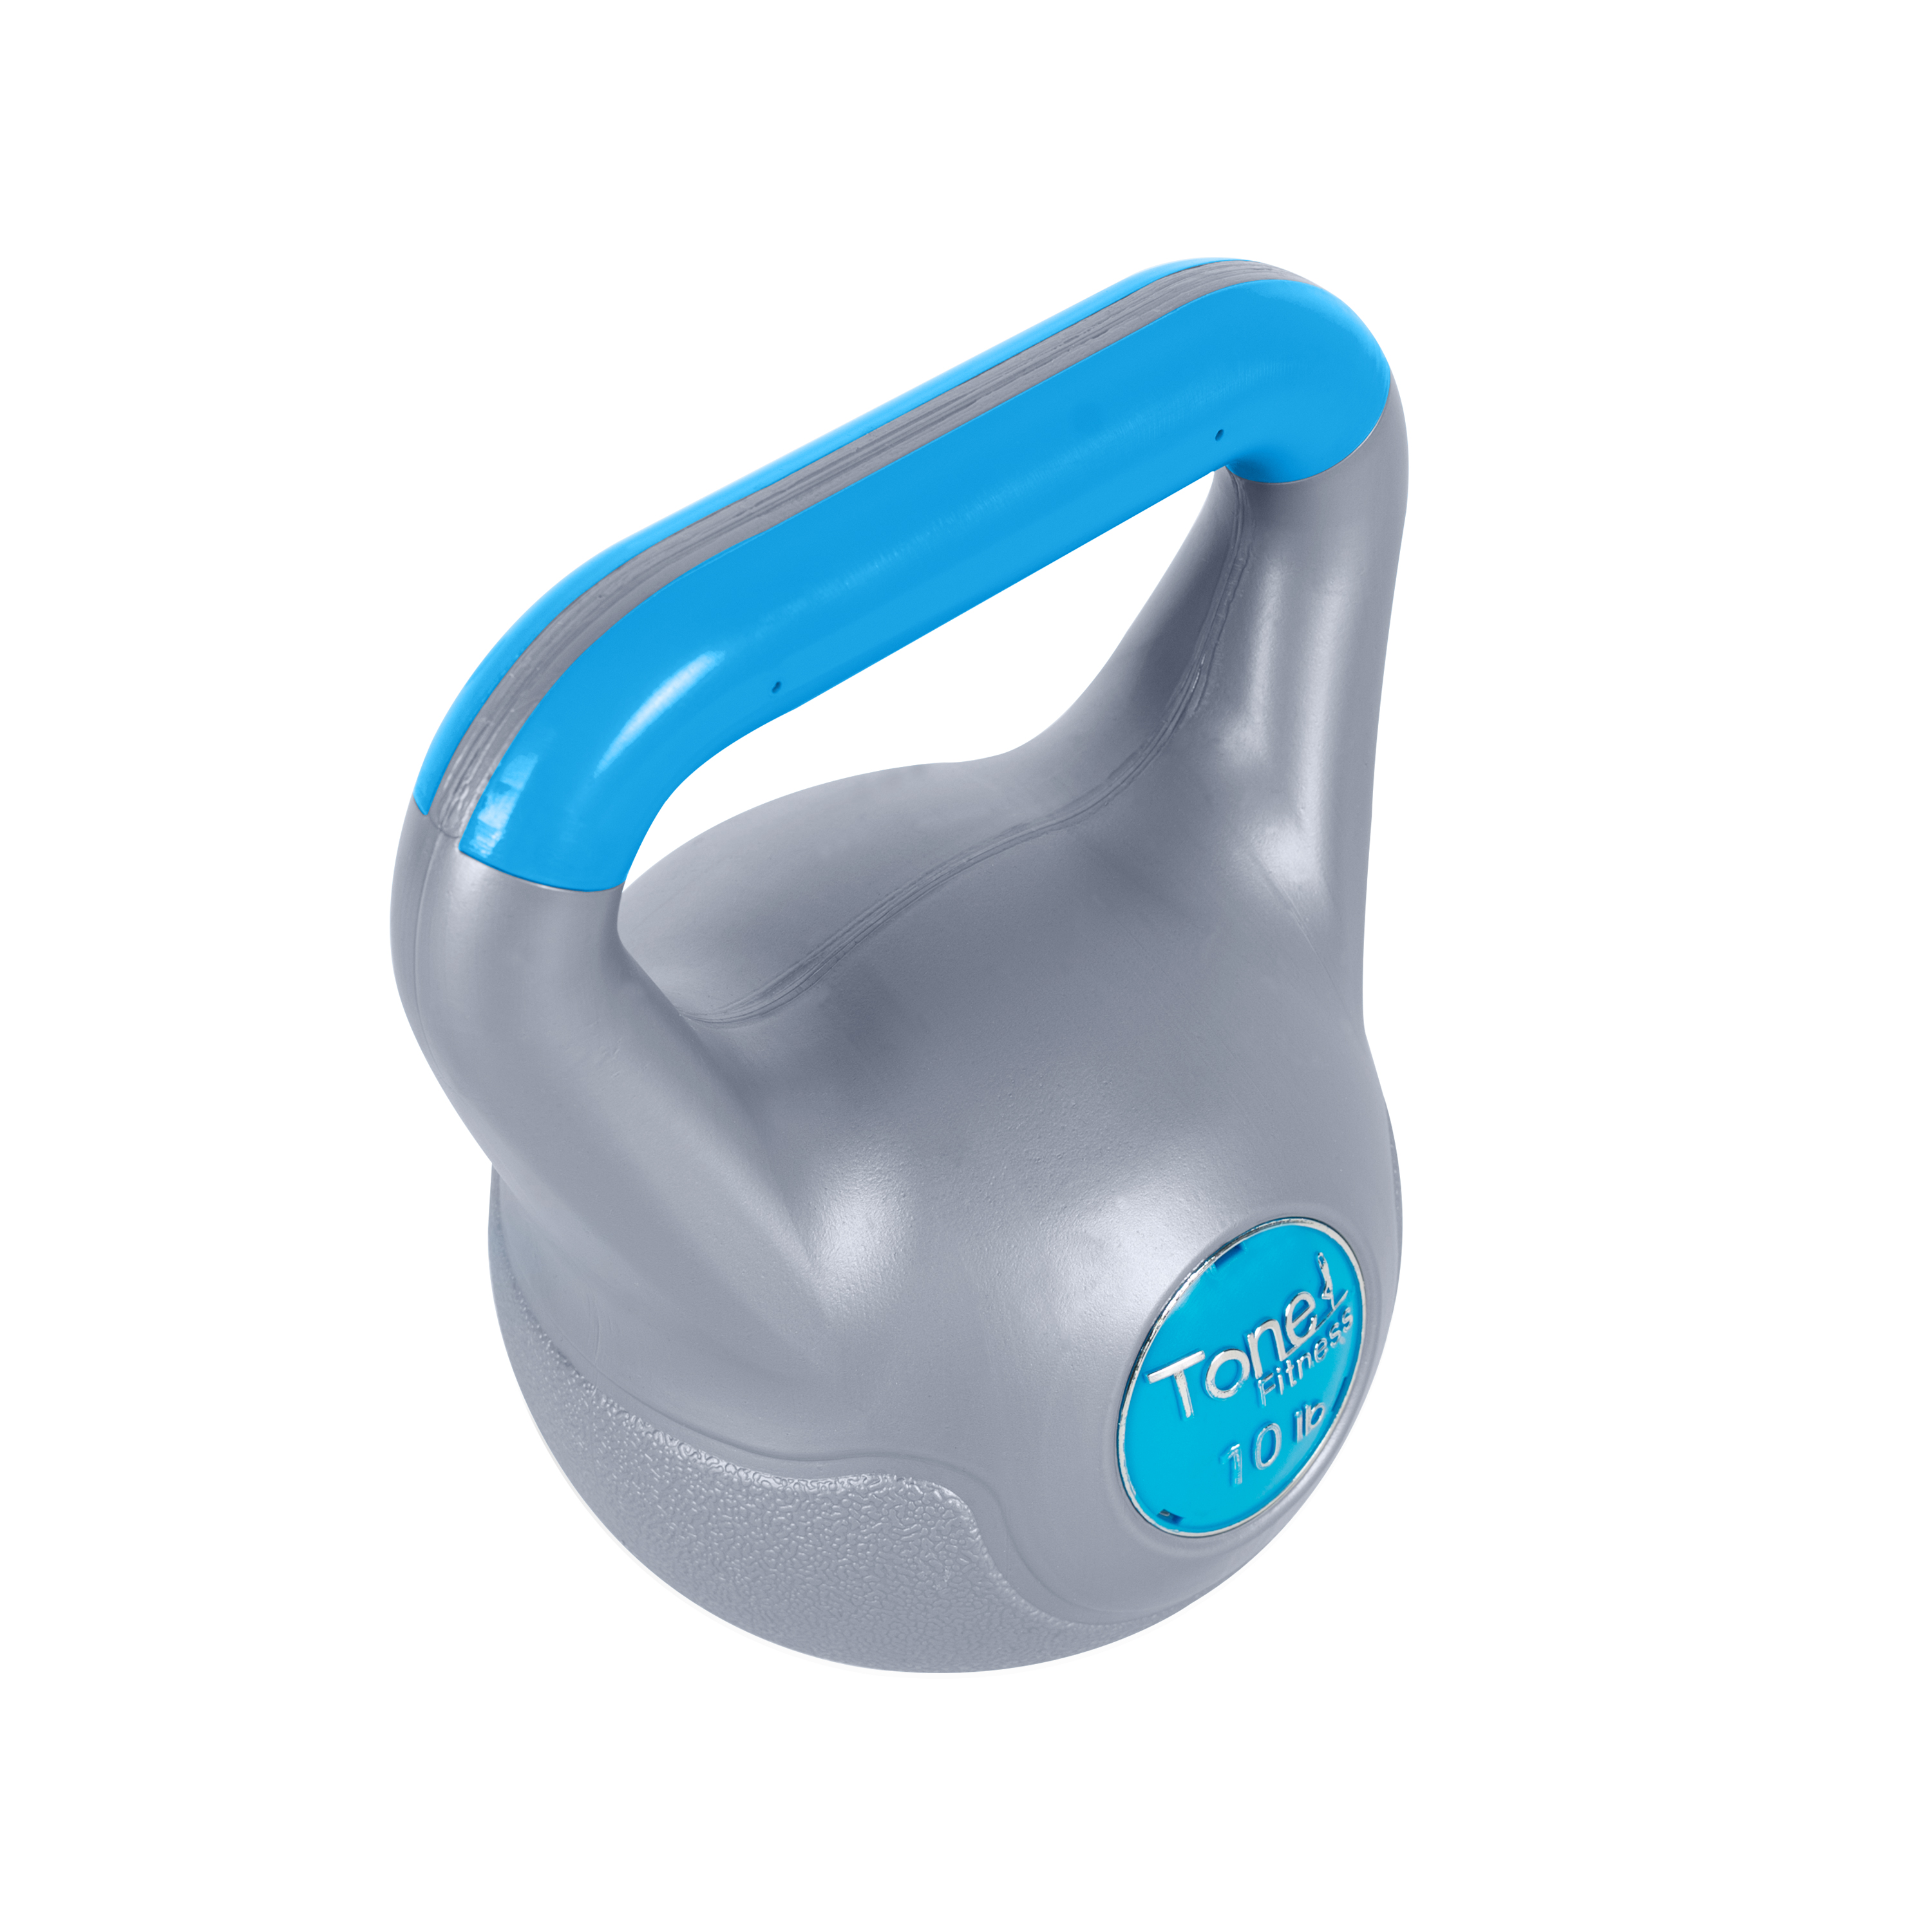 Tone Fitness, 10lb Cement Filled Kettlebell - image 3 of 7